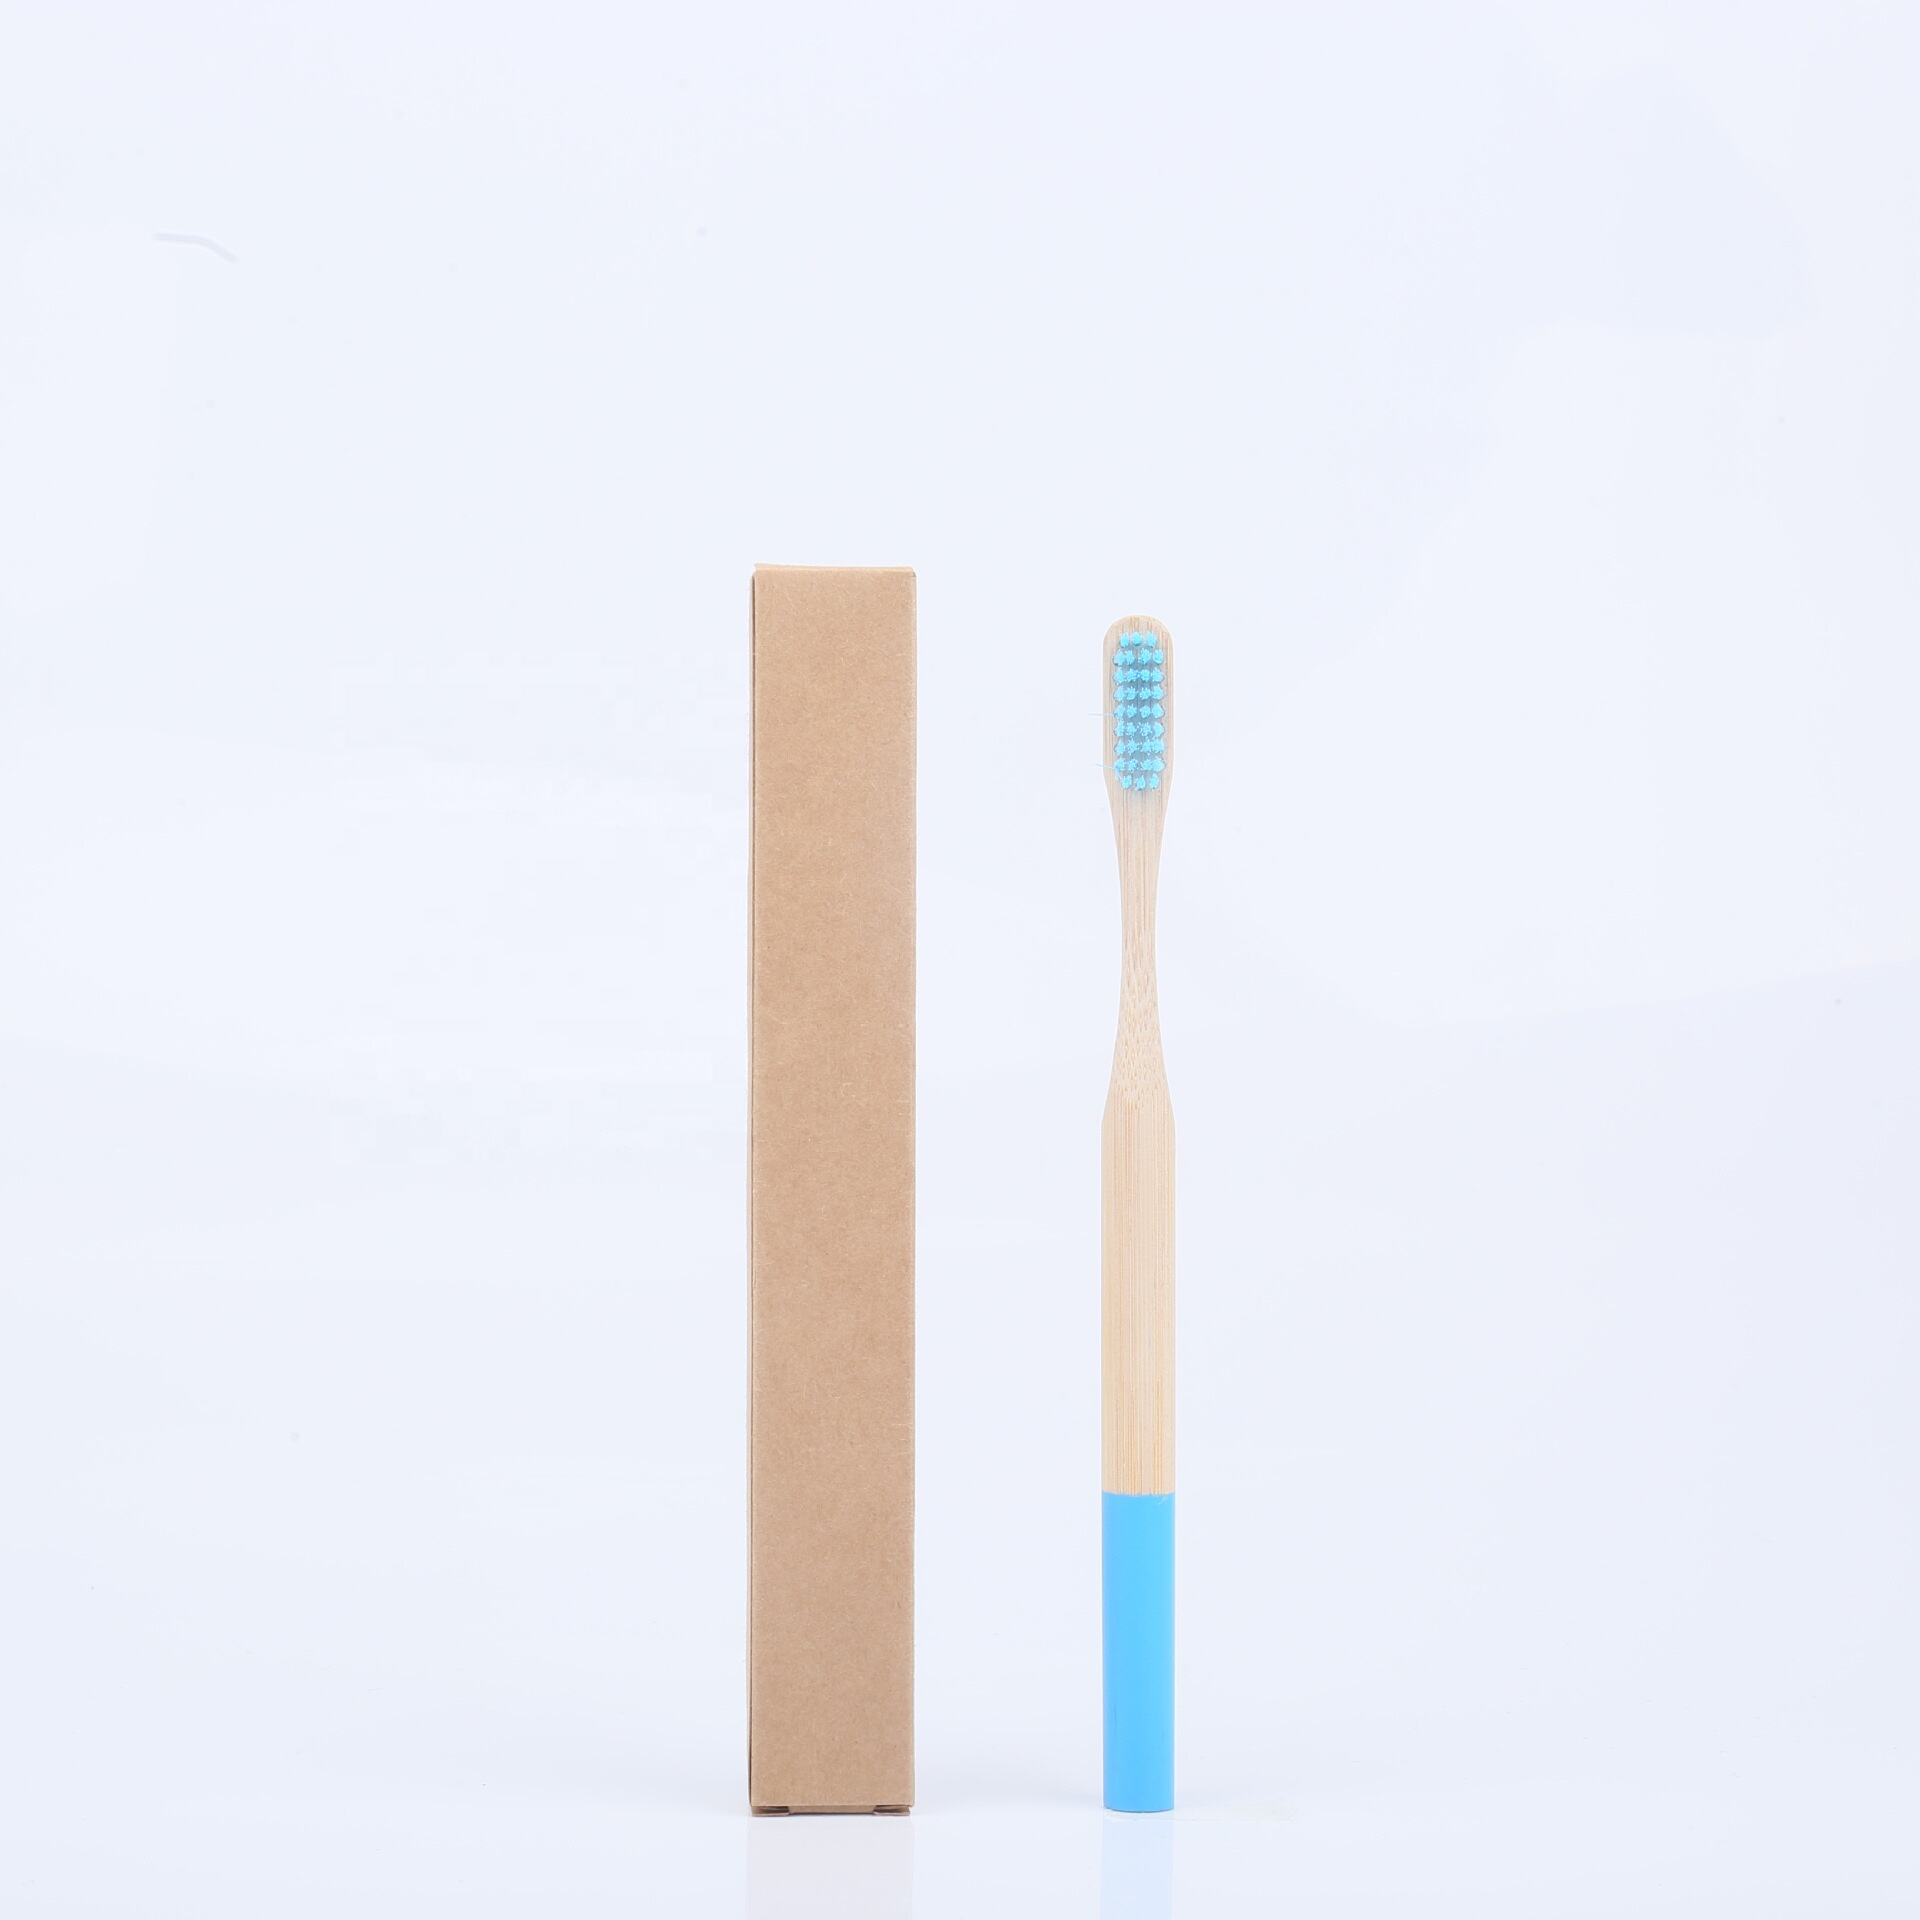 Privata Label Natura Bamboo Toothbrush Oral Hygiene Care Zero Waste Biodegradable Adult Toothbrush with Soft Carcoal Setis elit.